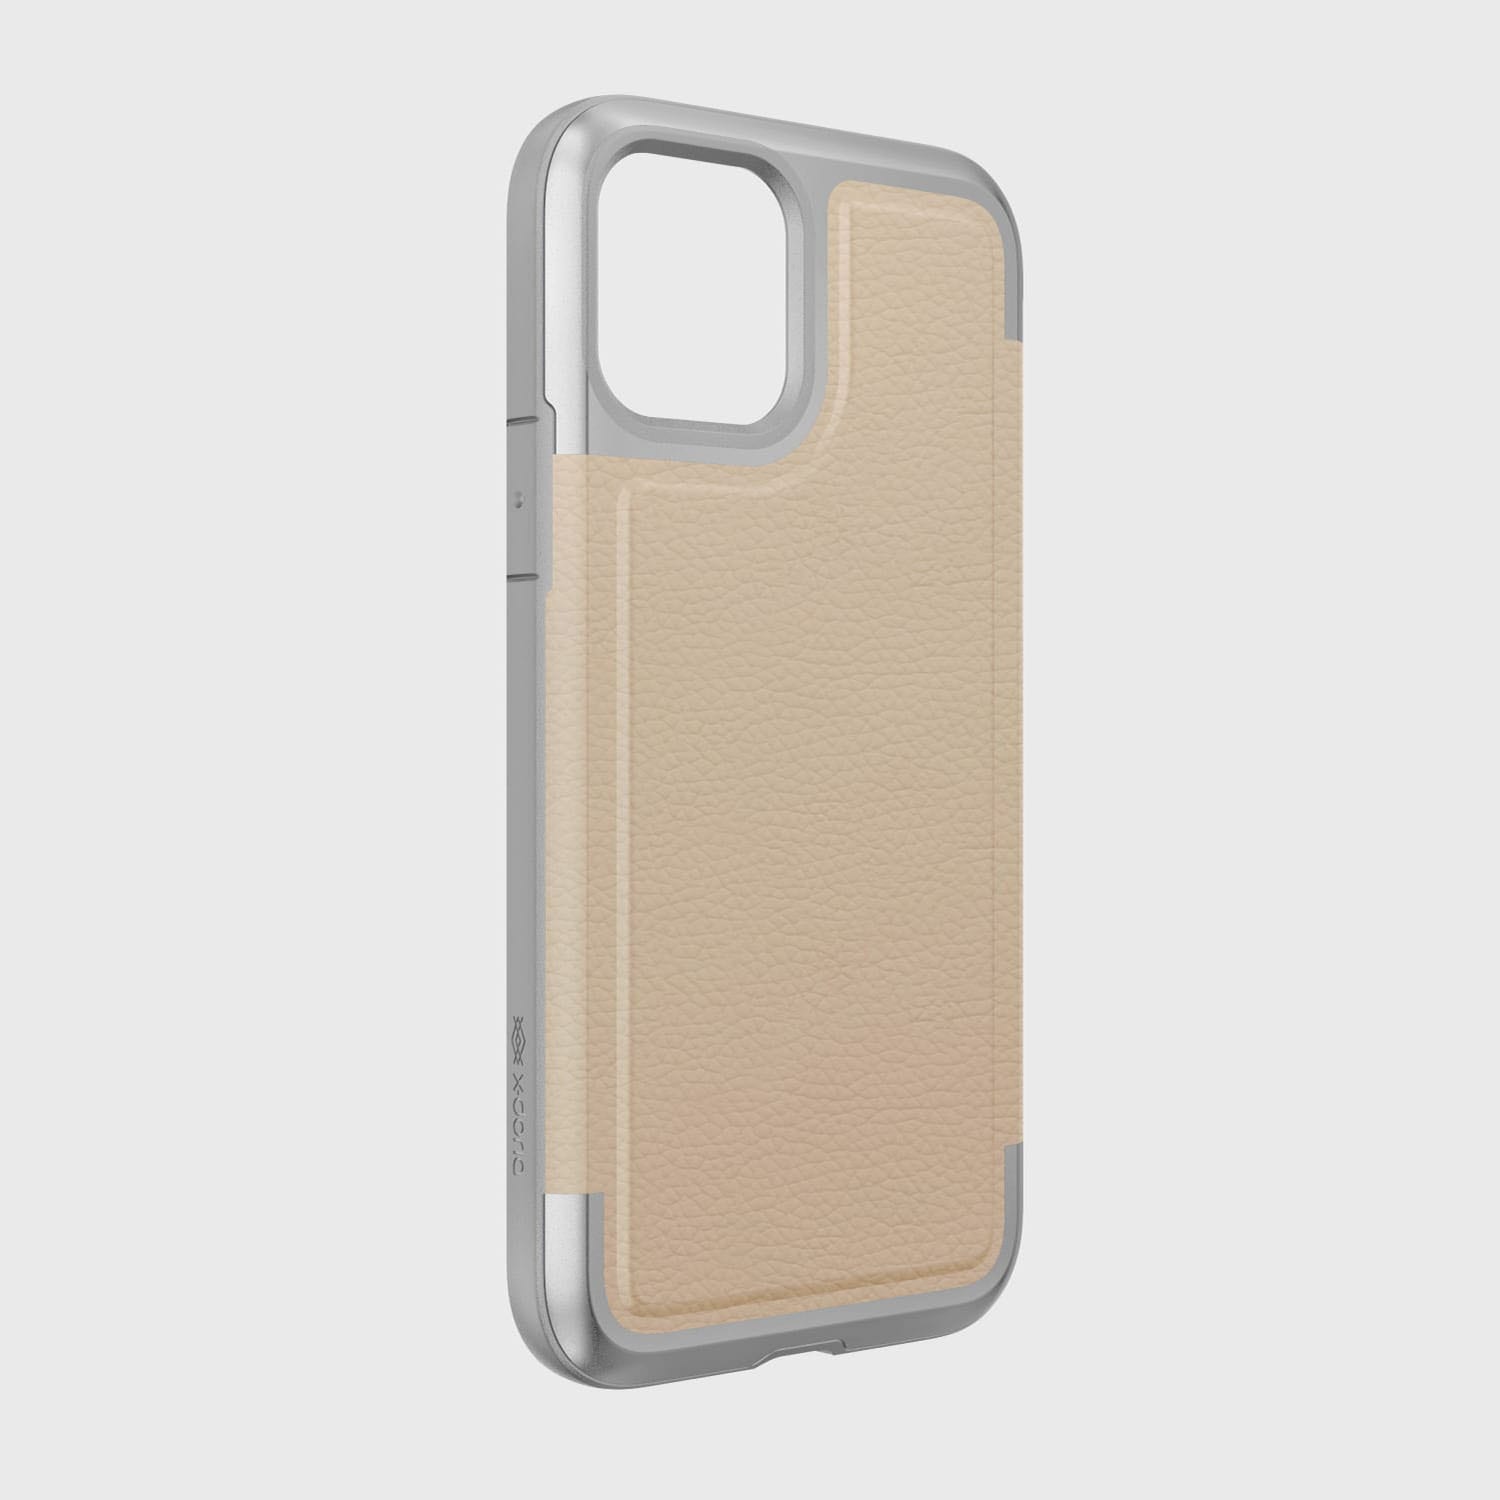 A protective beige leather case for the iPhone 11 Pro, offering drop protection. Now replaced with the given product and brand names:

A protective beige leather case for the Raptic iPhone 11 Pro Case - Prime, offering drop protection.